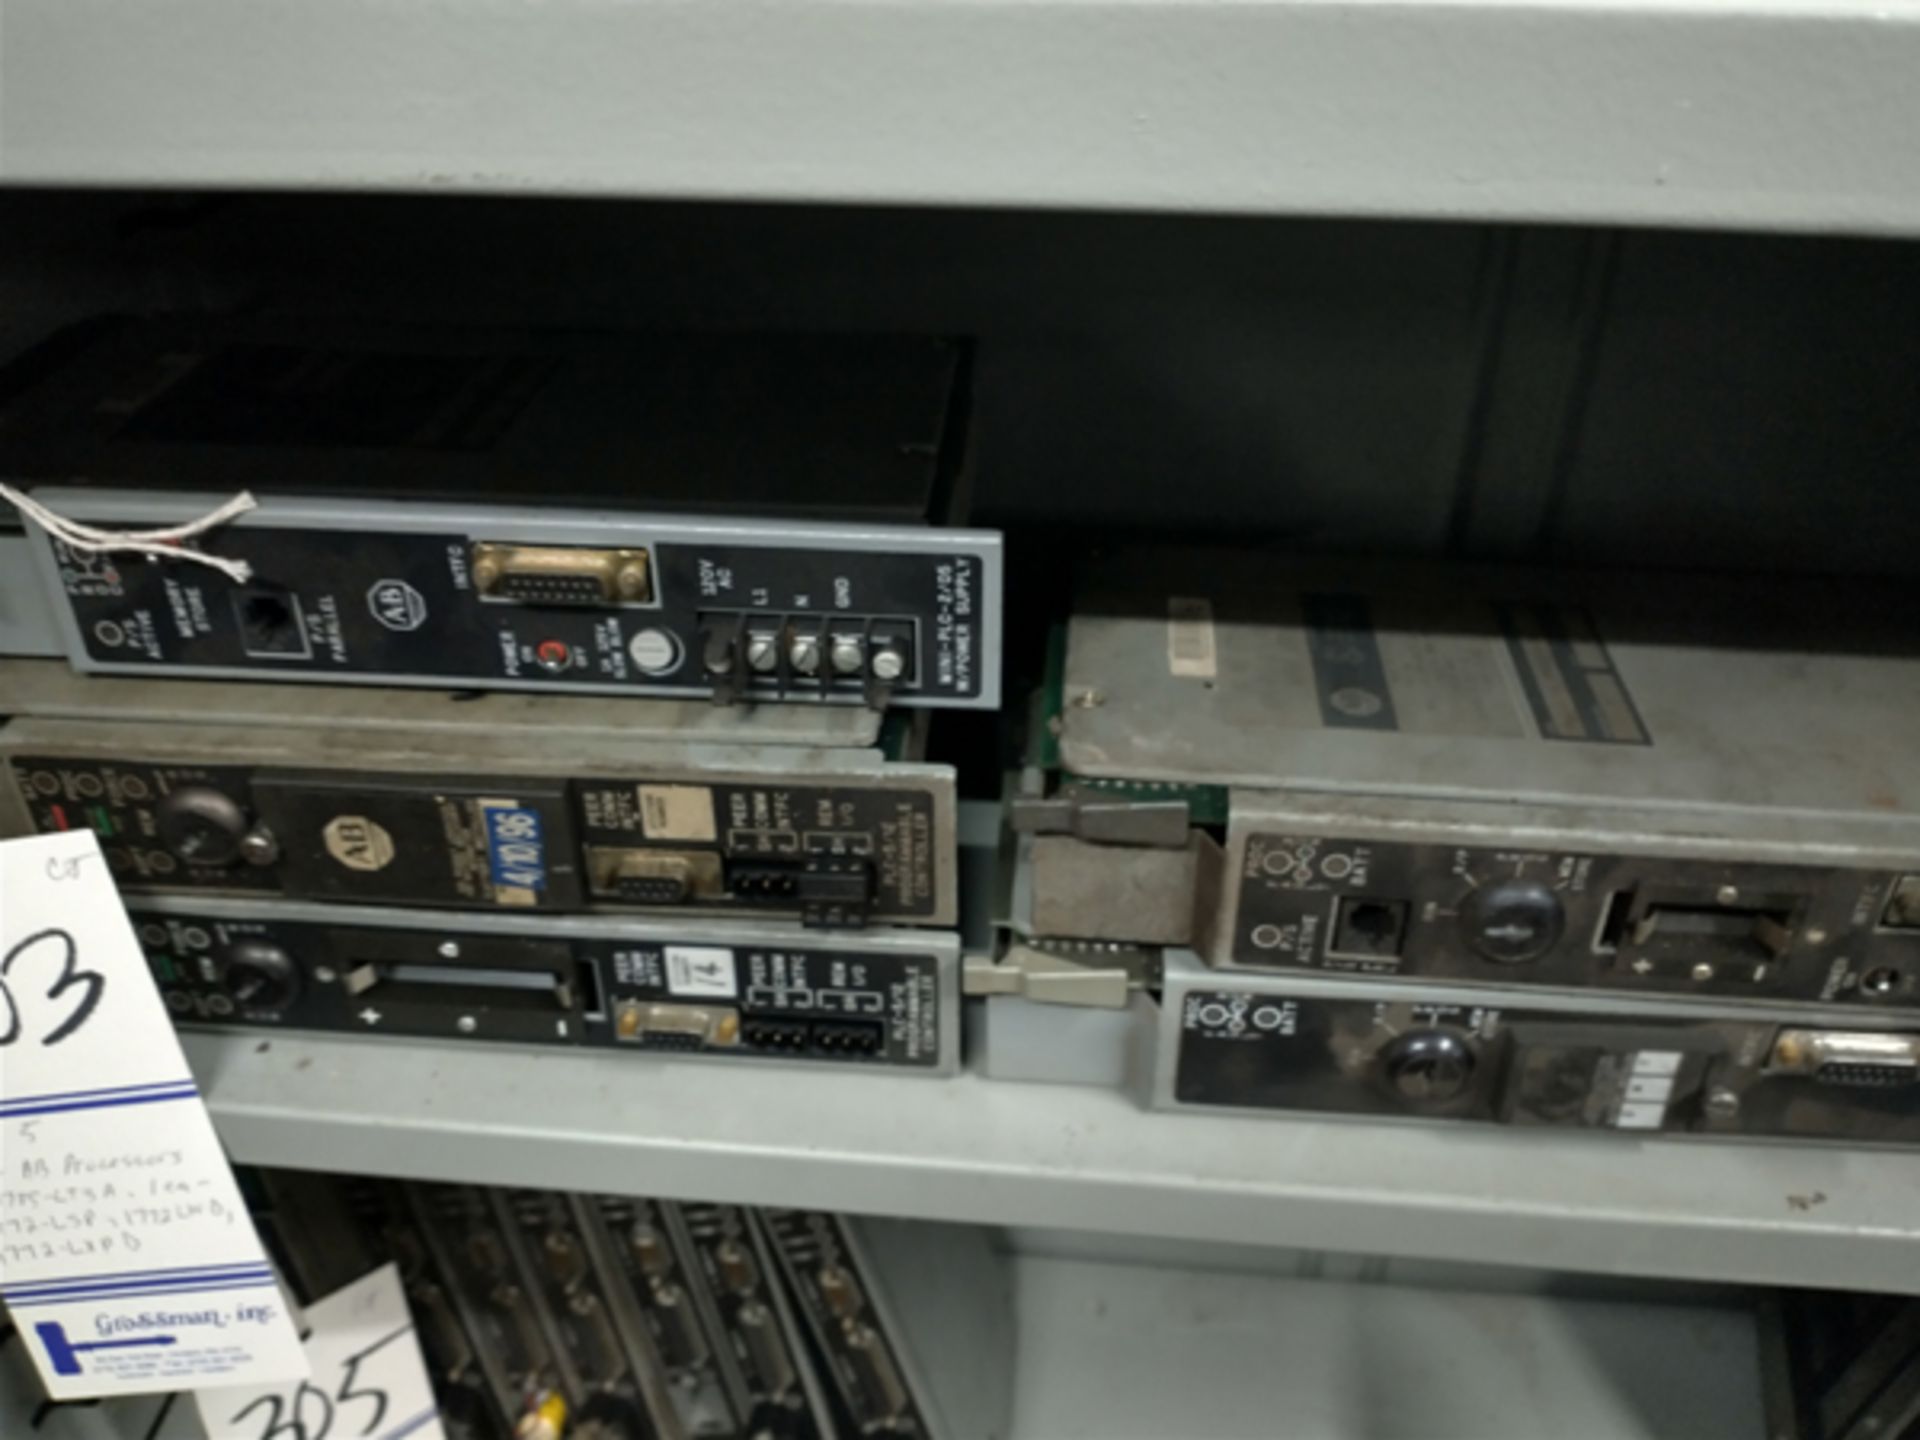 LOT OF 5 AB PROCESSORS (2) 1785-LT3A , 1EA : 1772-LSP , 1772-LWD AND 1772-LXPD - Image 3 of 3